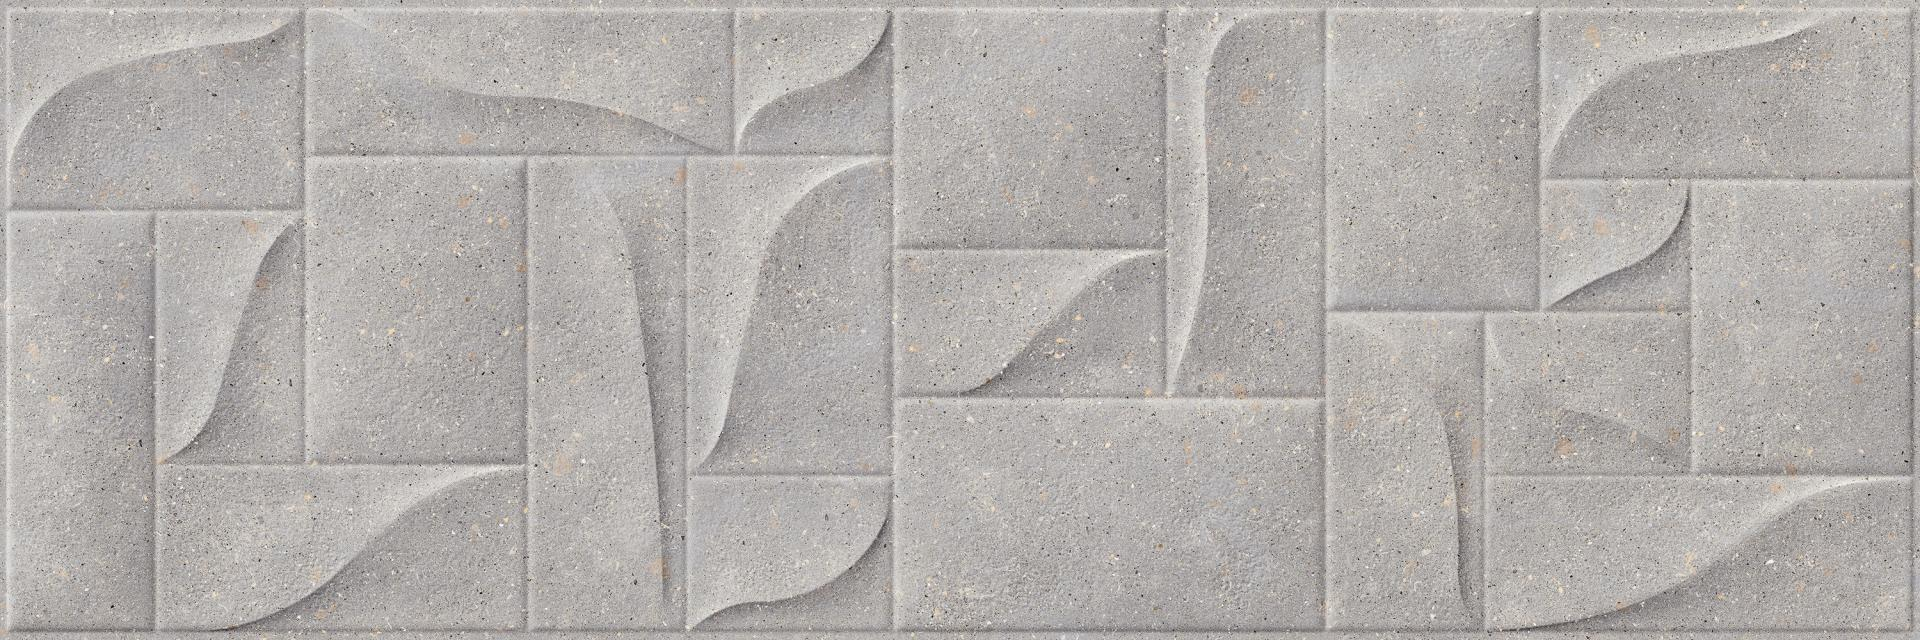 faience-sanchis-cement-stone-40x120-0-96m2-p-perfection-grey-1